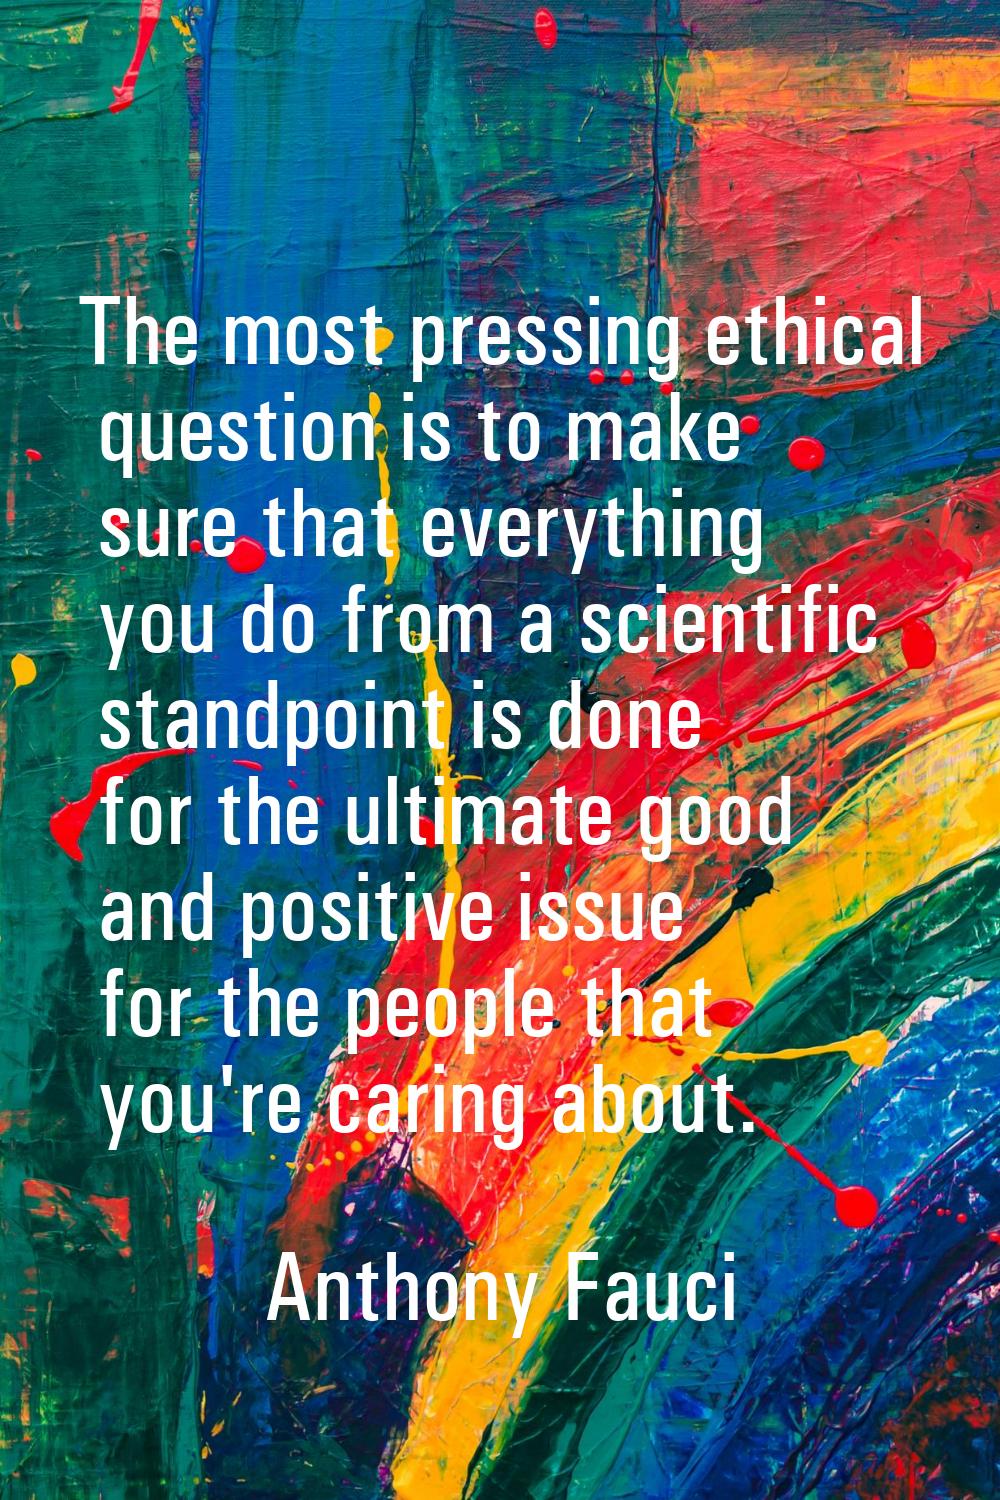 The most pressing ethical question is to make sure that everything you do from a scientific standpo